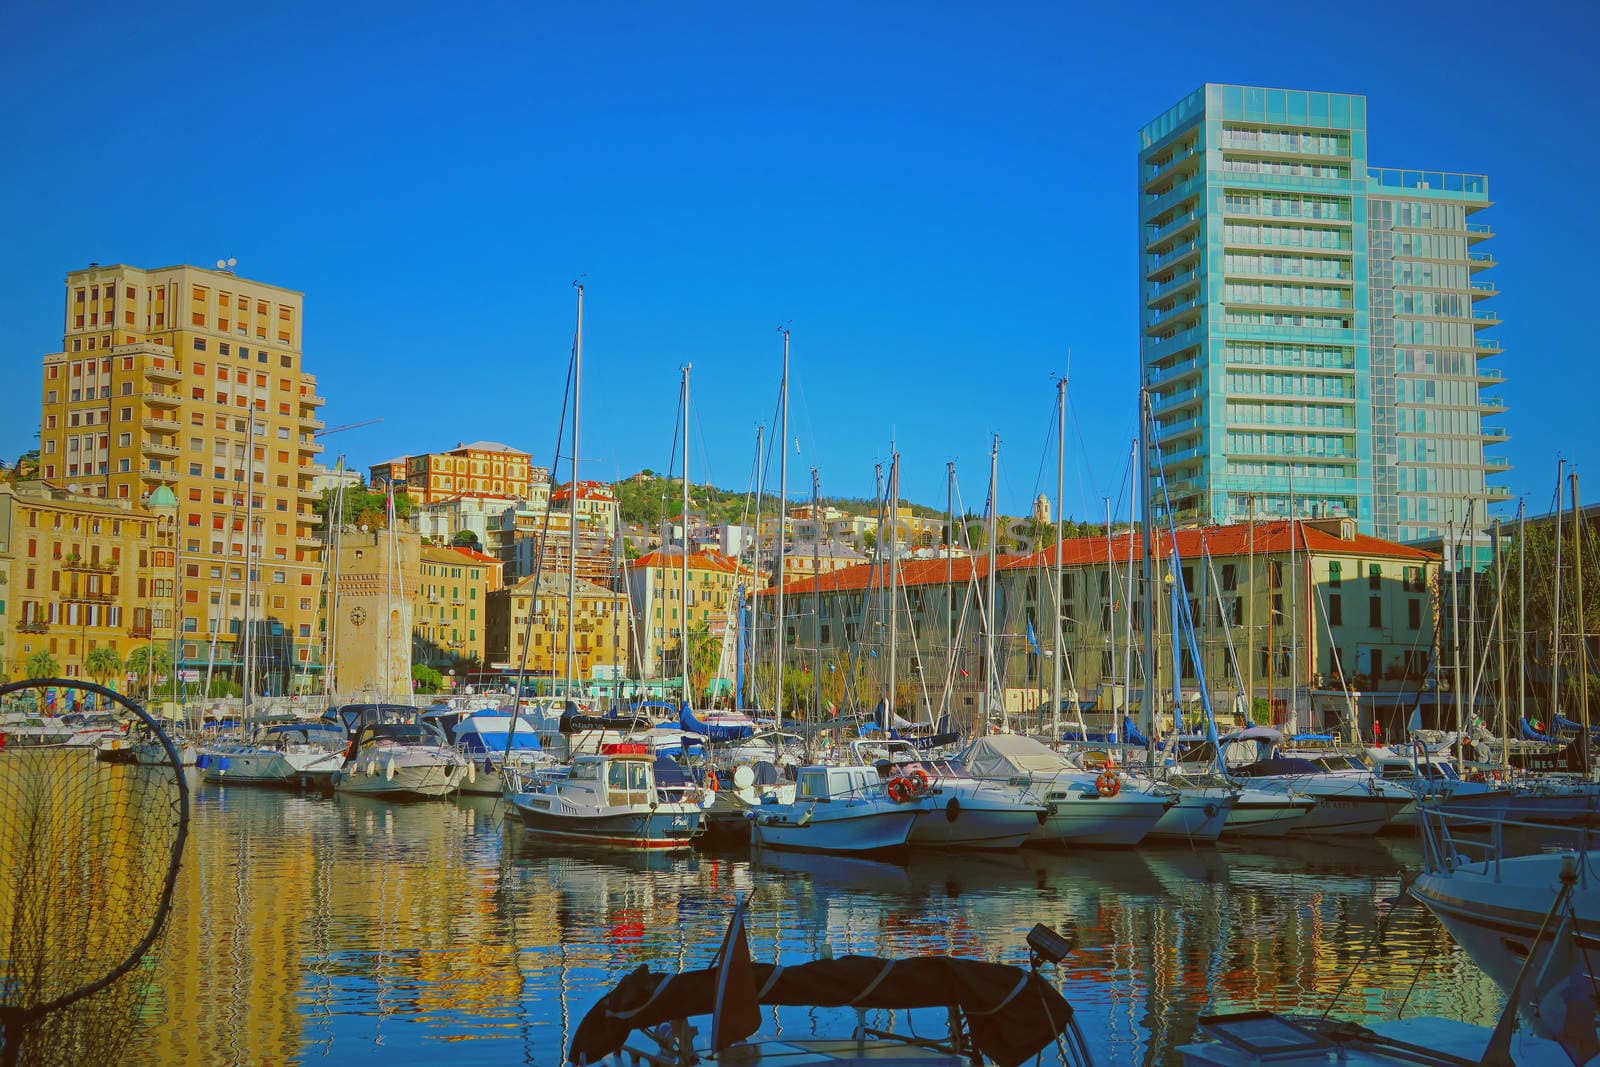 View of the port of Savona in Liguria